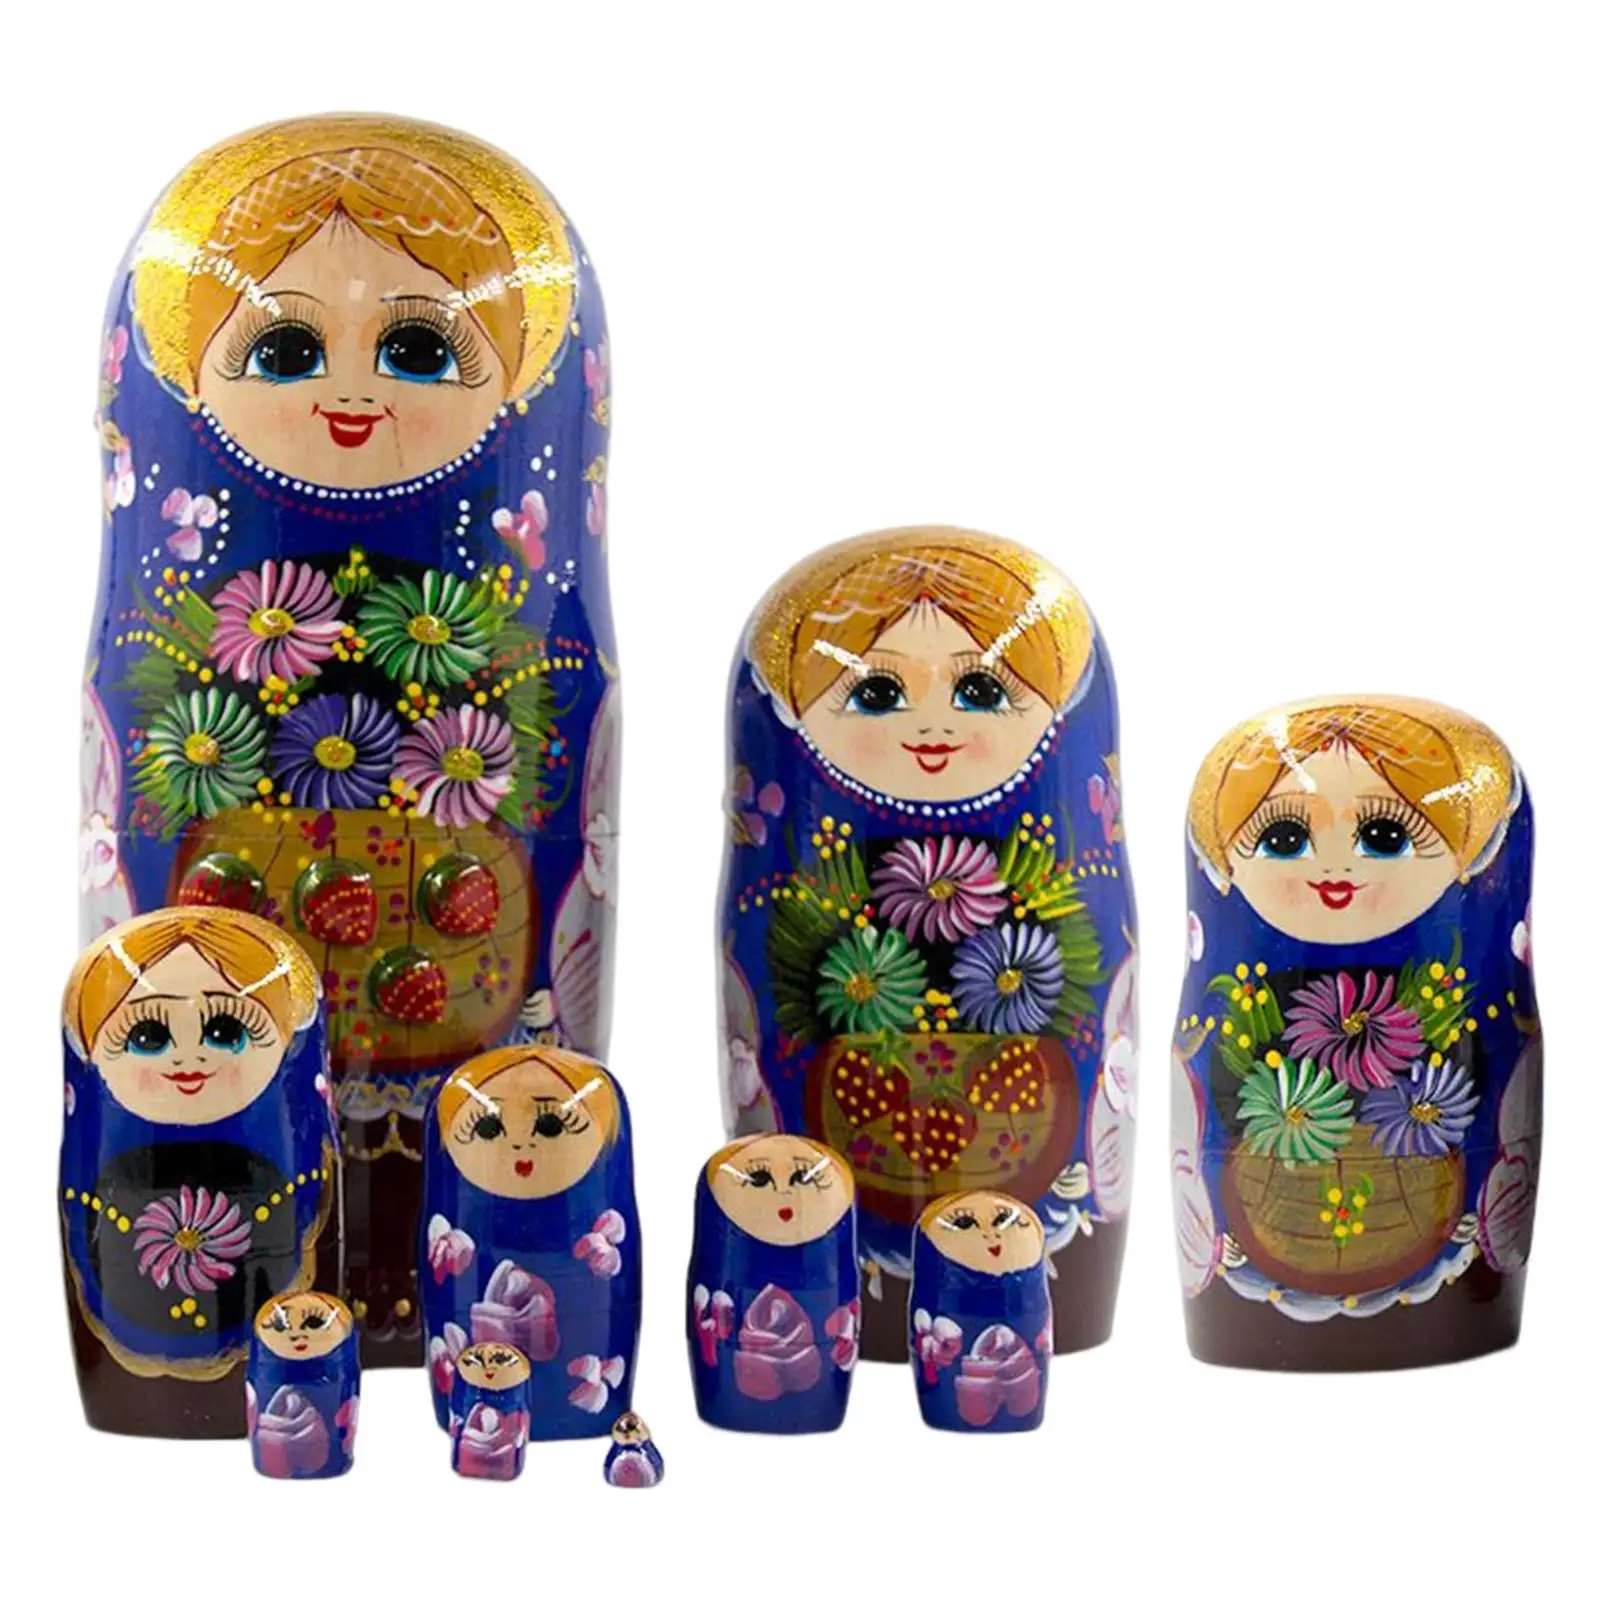 10Pcs Nesting Dolls Toy Collectible Dolls Traditional Matryoshka for Desktop Cafe Office Home Decor